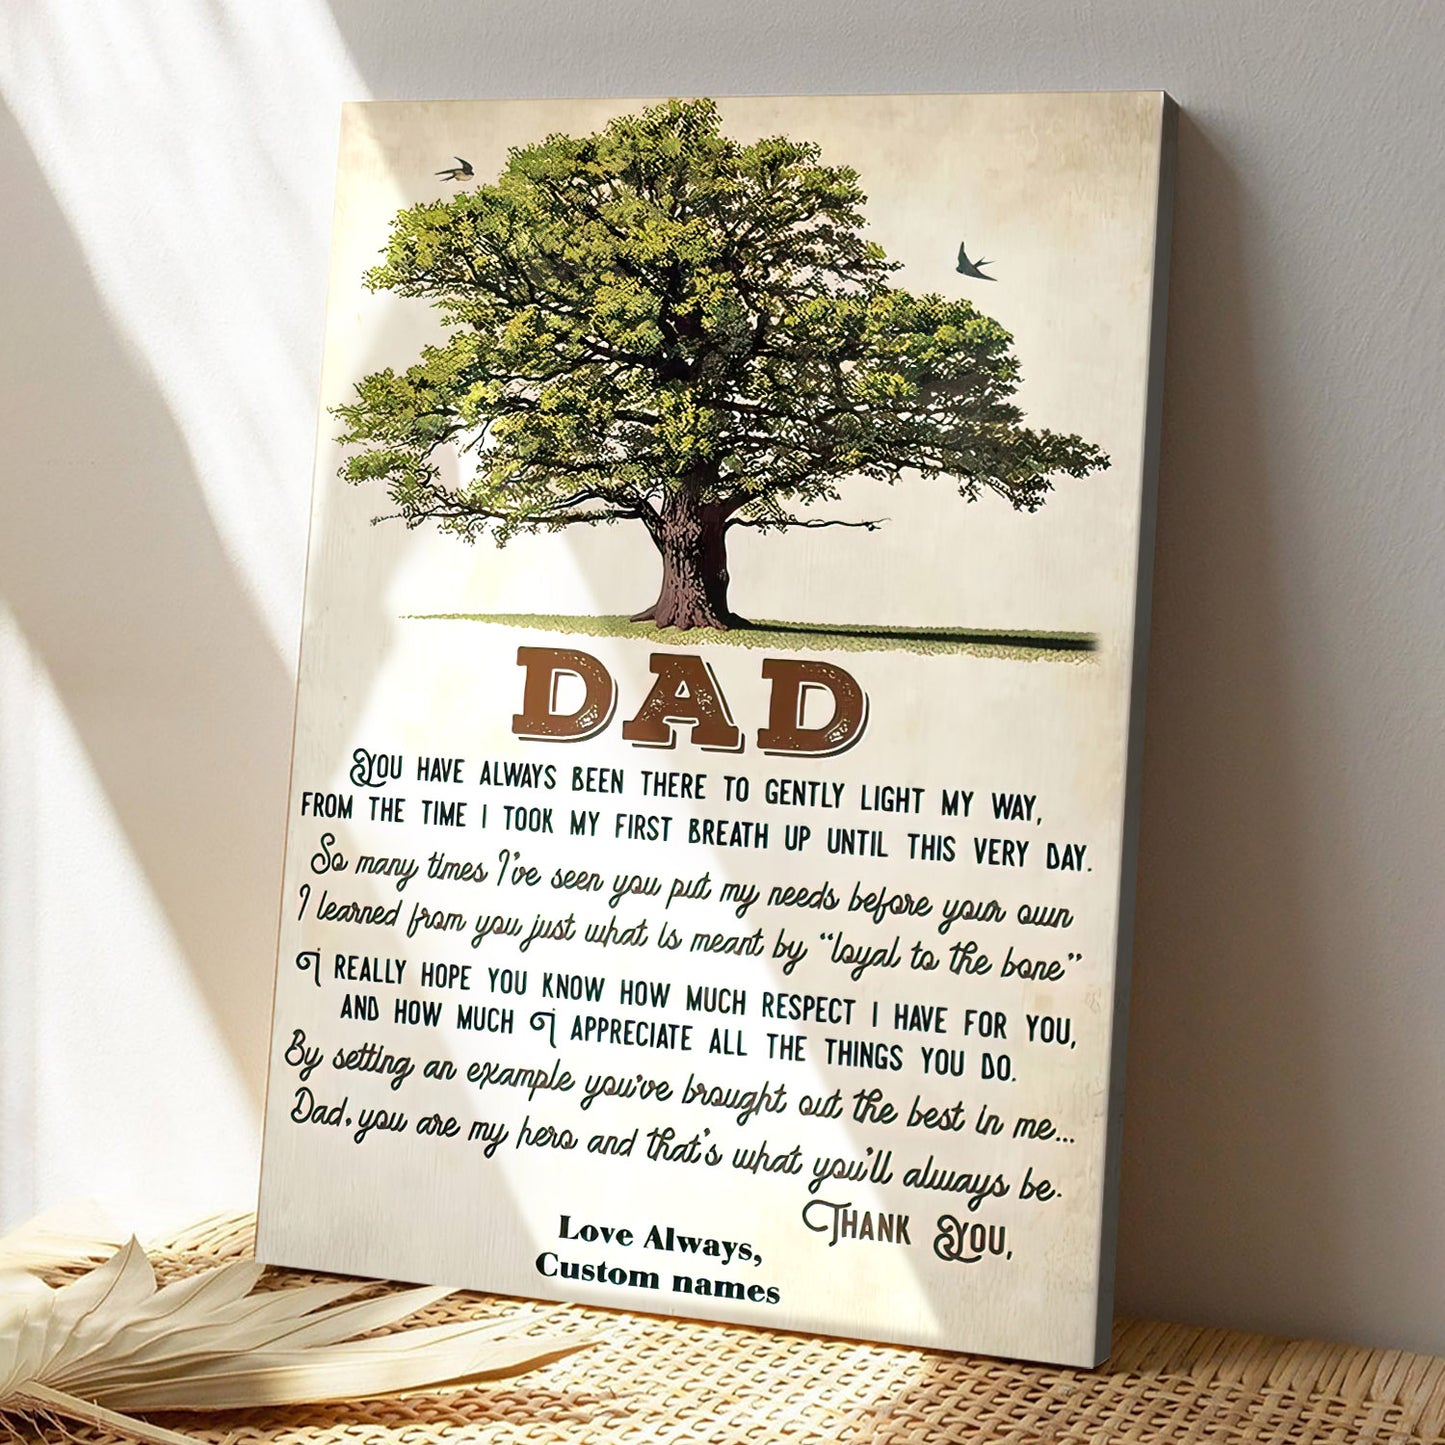 Personalized Canvas - Dad - You Are my Hero And That's What You'll Always Be - Father's Day Canvas Art - Best Gift For Dad - Ciaocustom